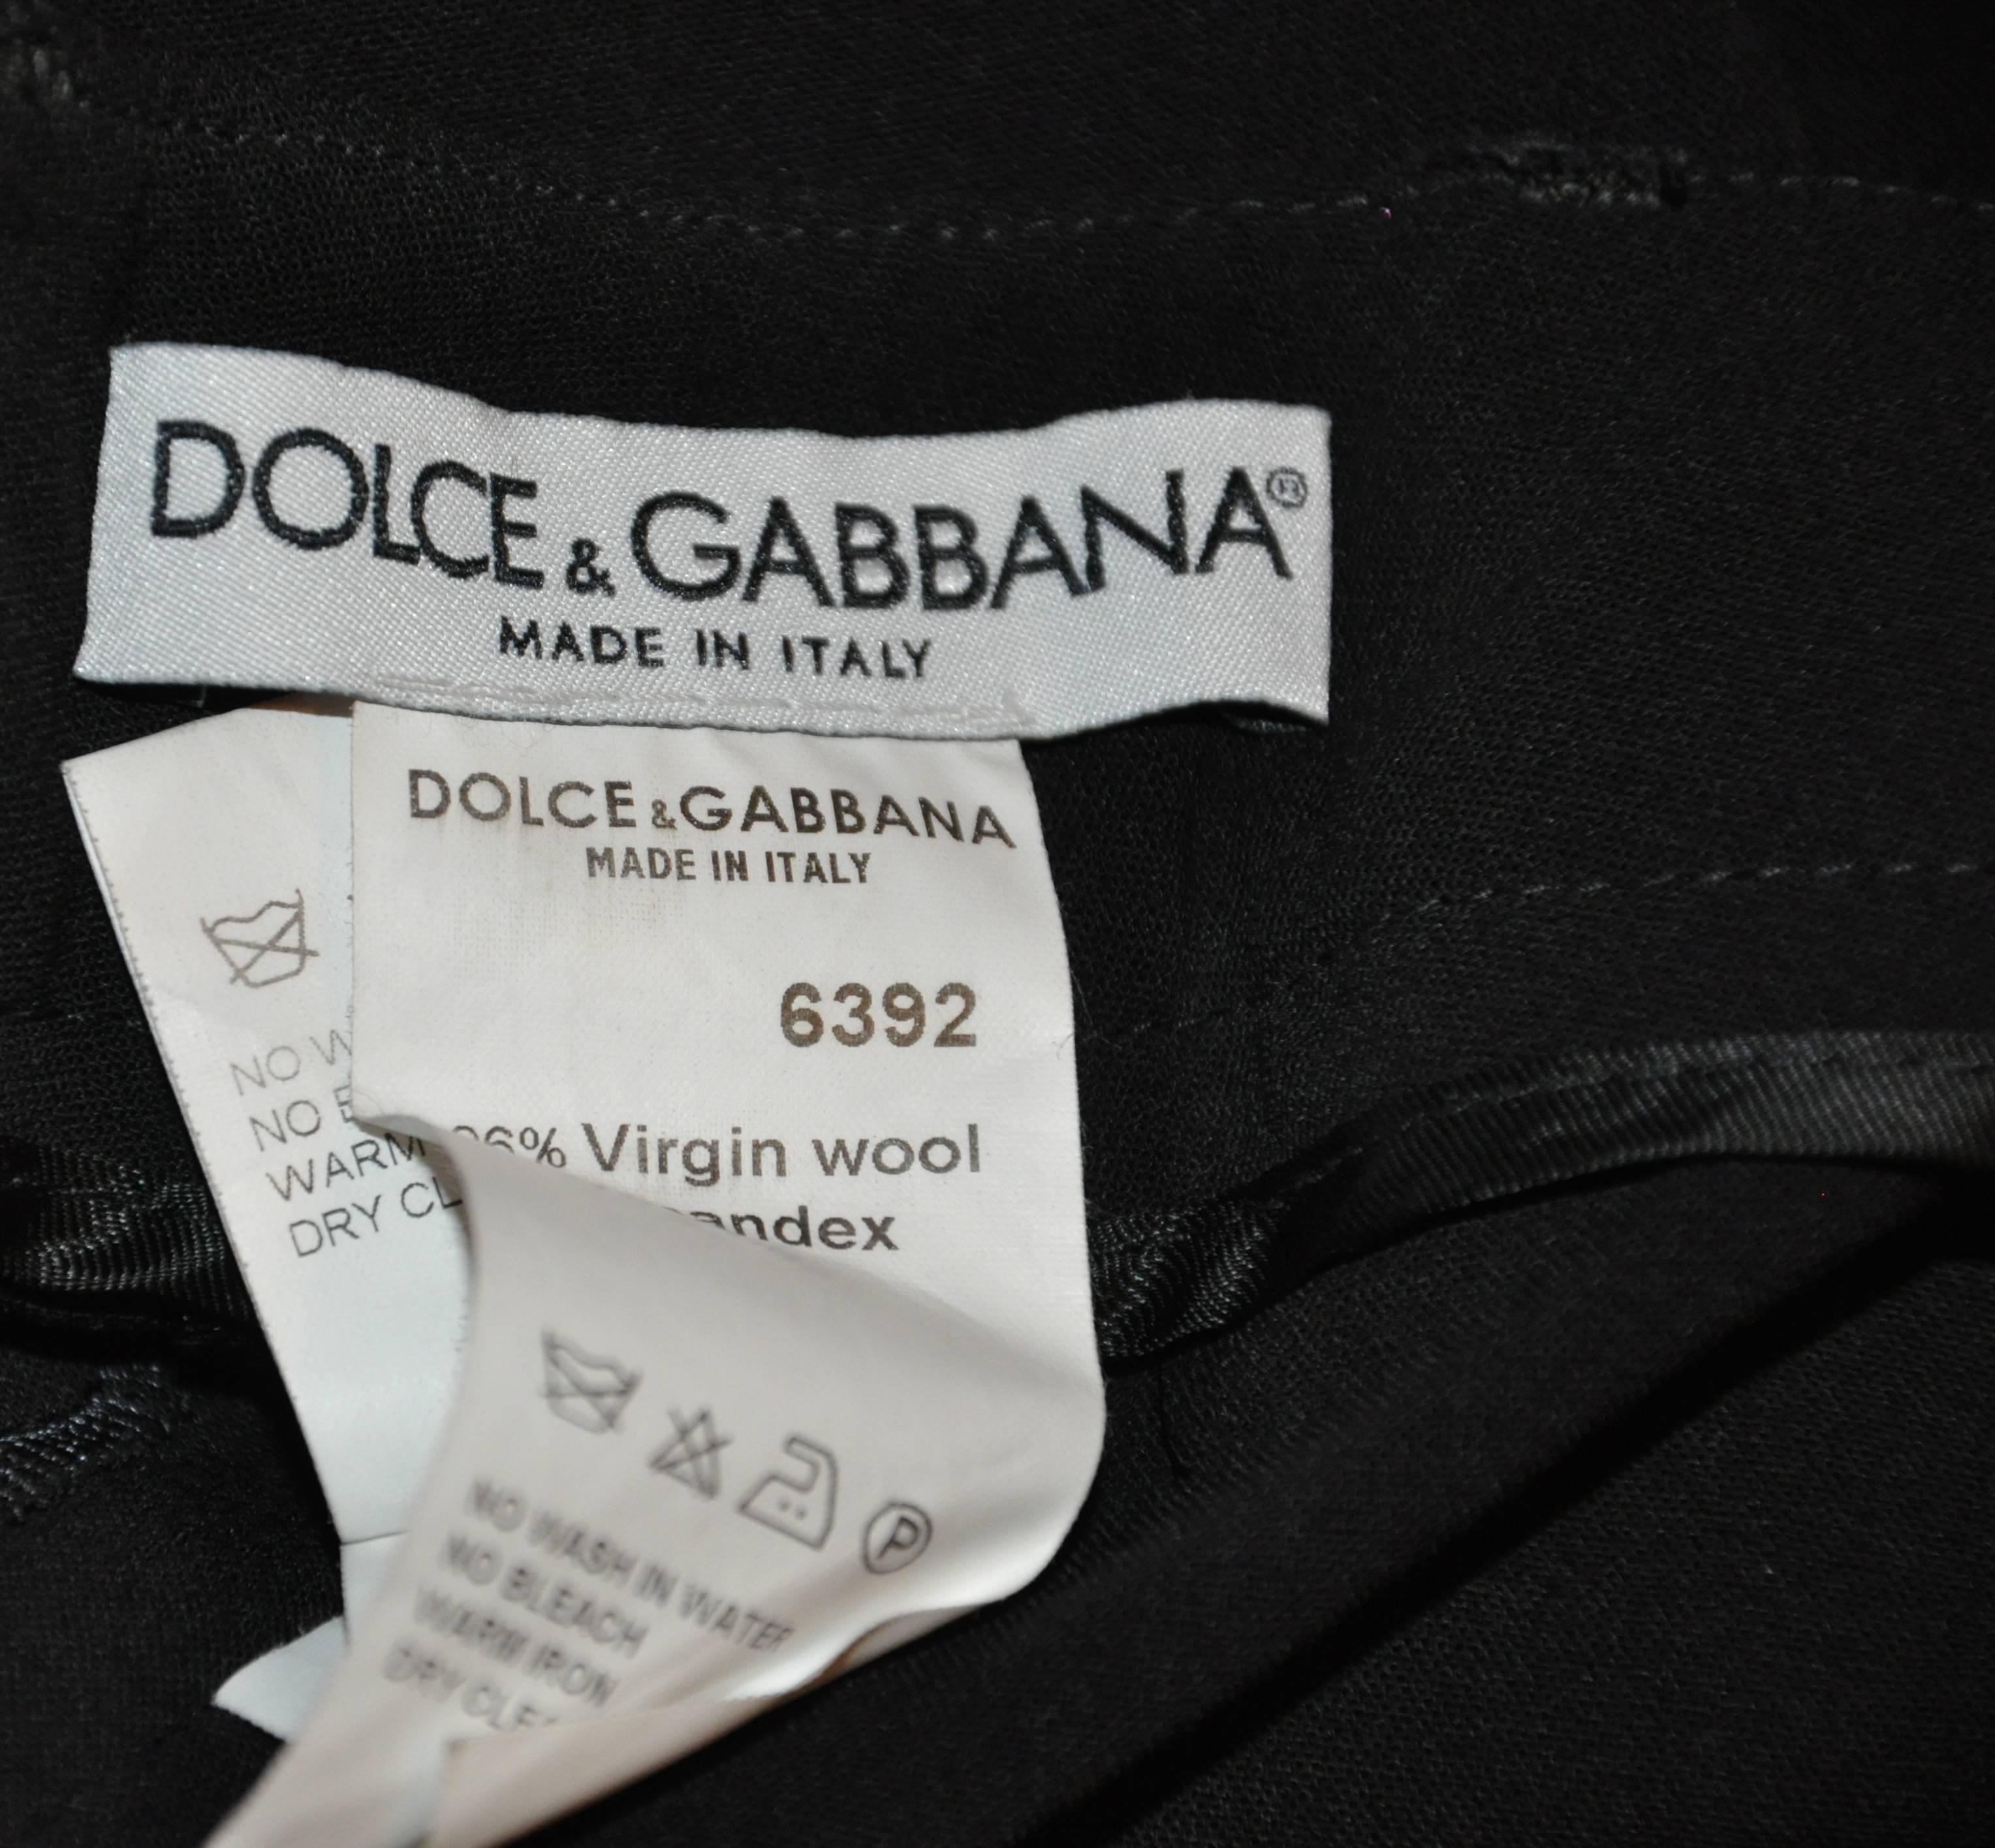           Dolce & Gabbana black relaxed-fit trousers are accented with cuff finishing on the legs. The waist measures 29